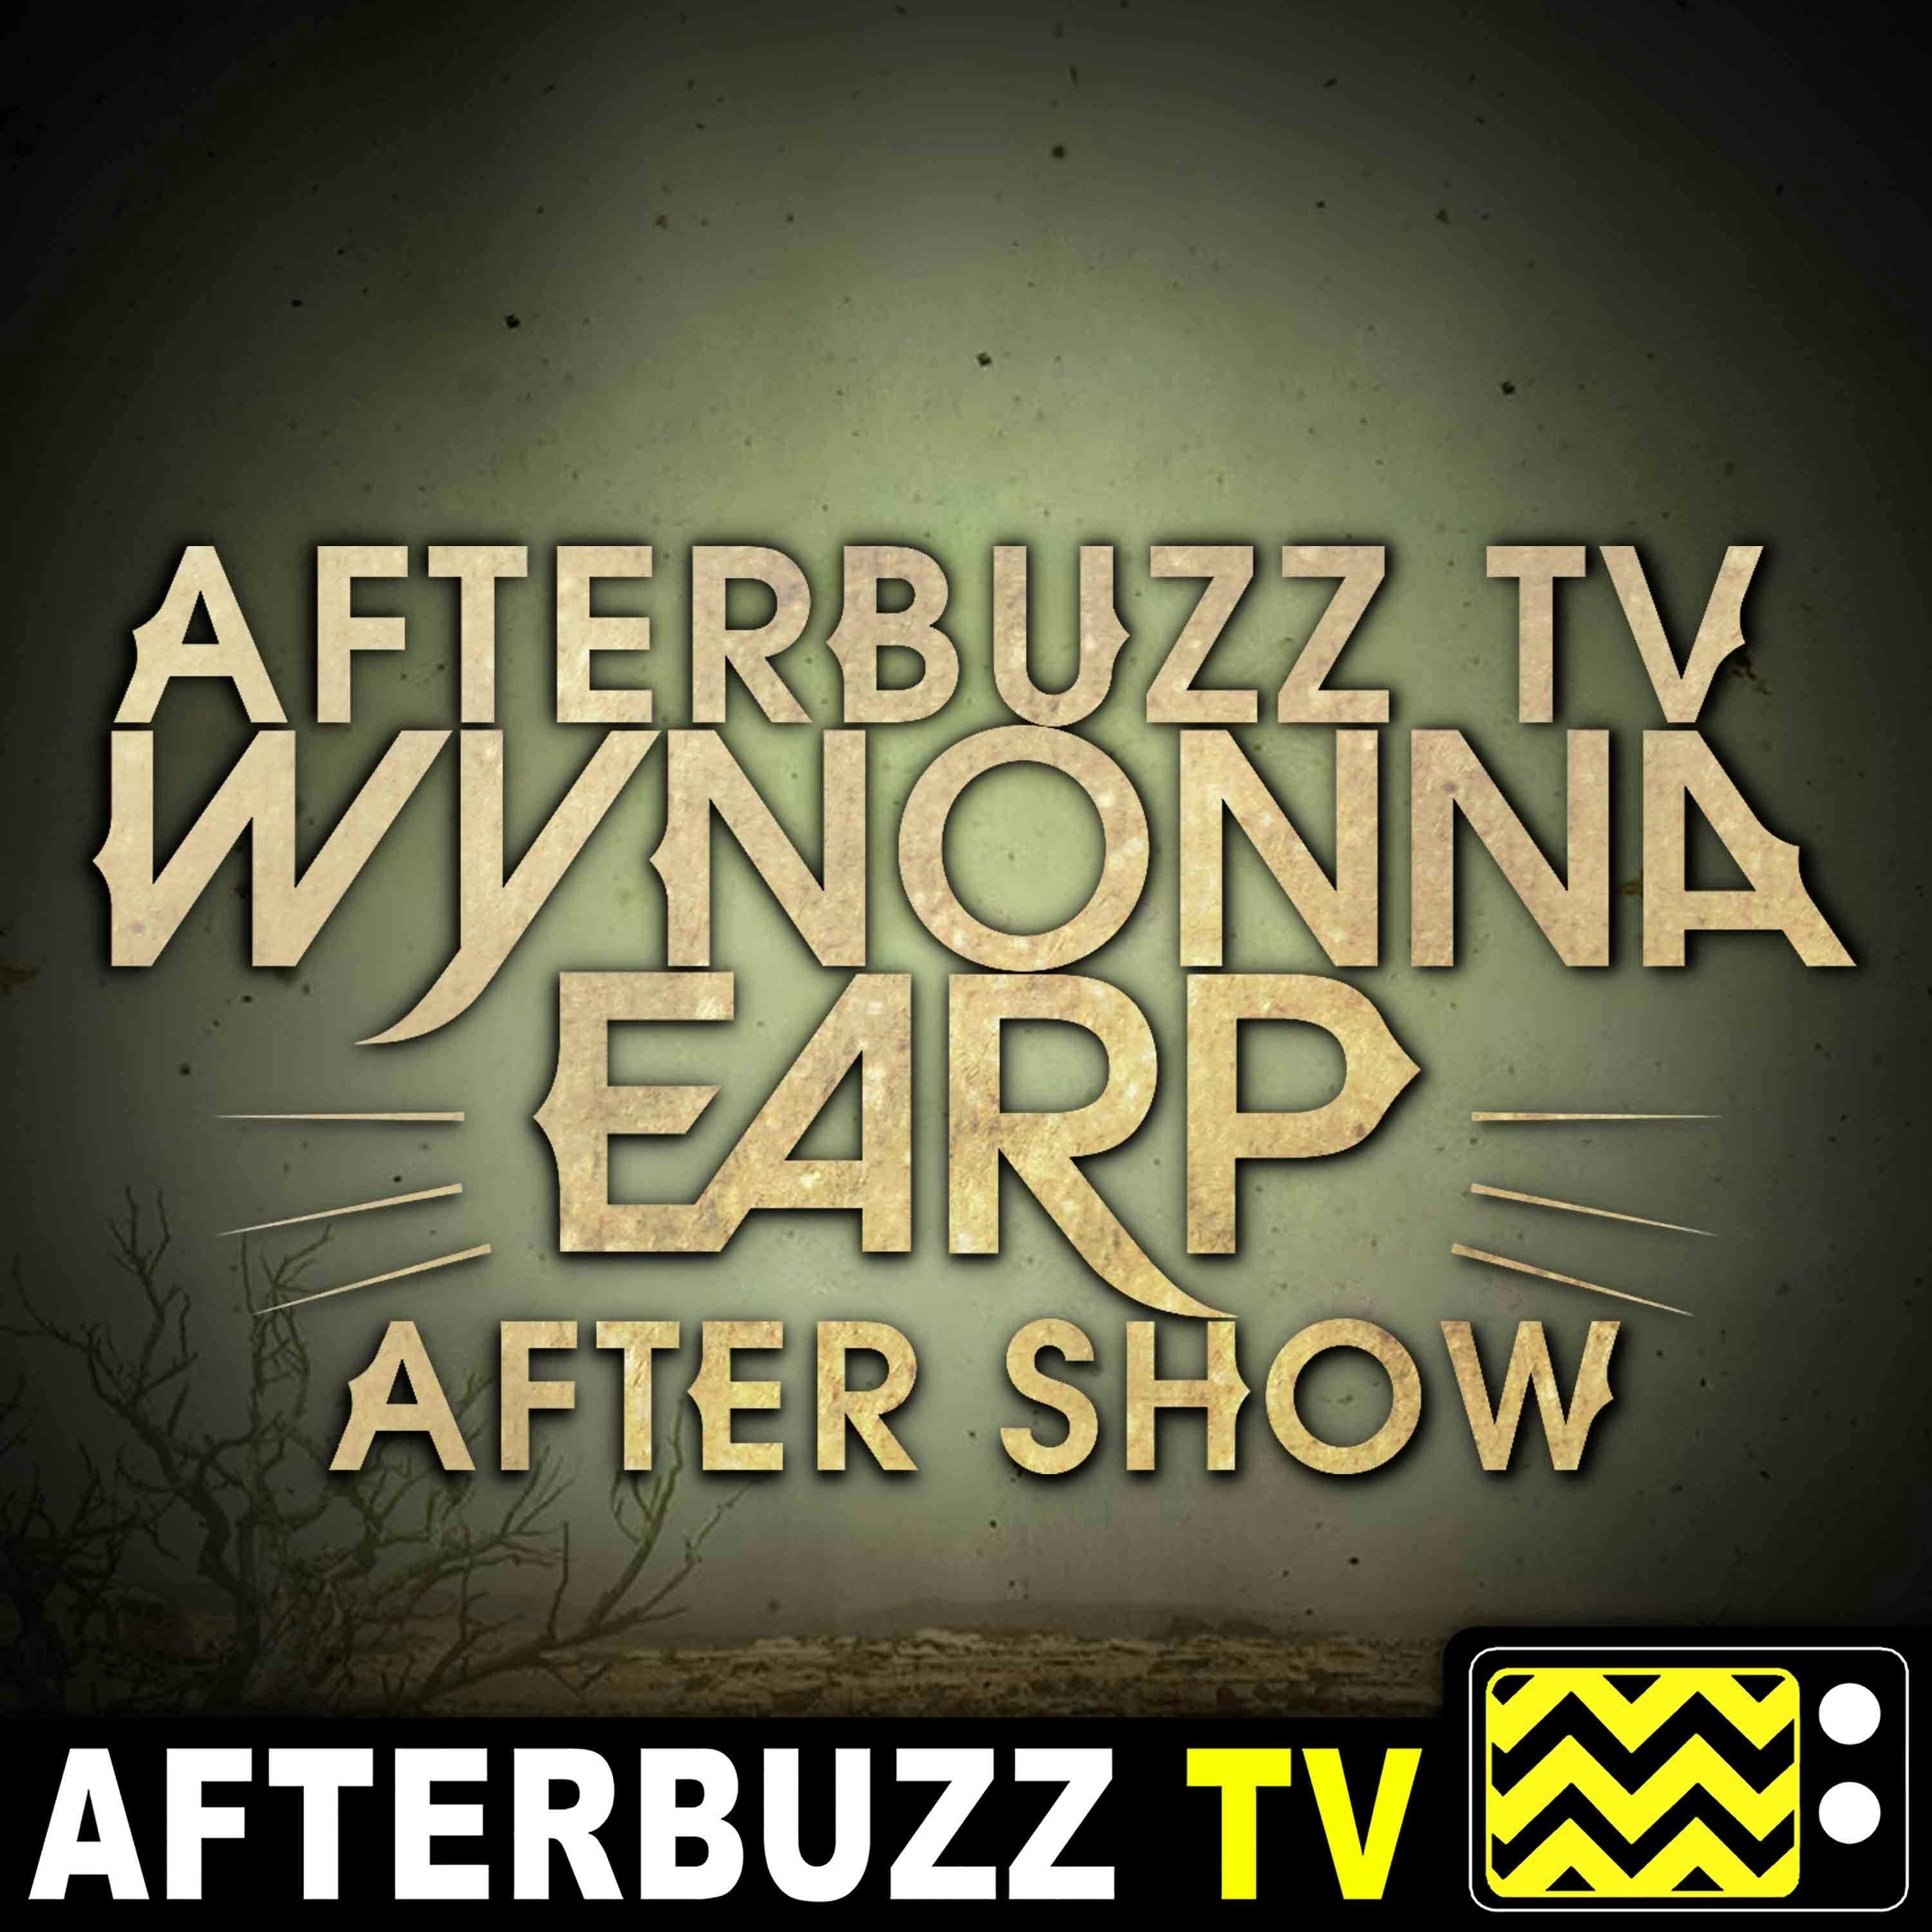 Wynonna Earp S:3 | Waiting Forever For You E:8 | AfterBuzz TV AfterShow